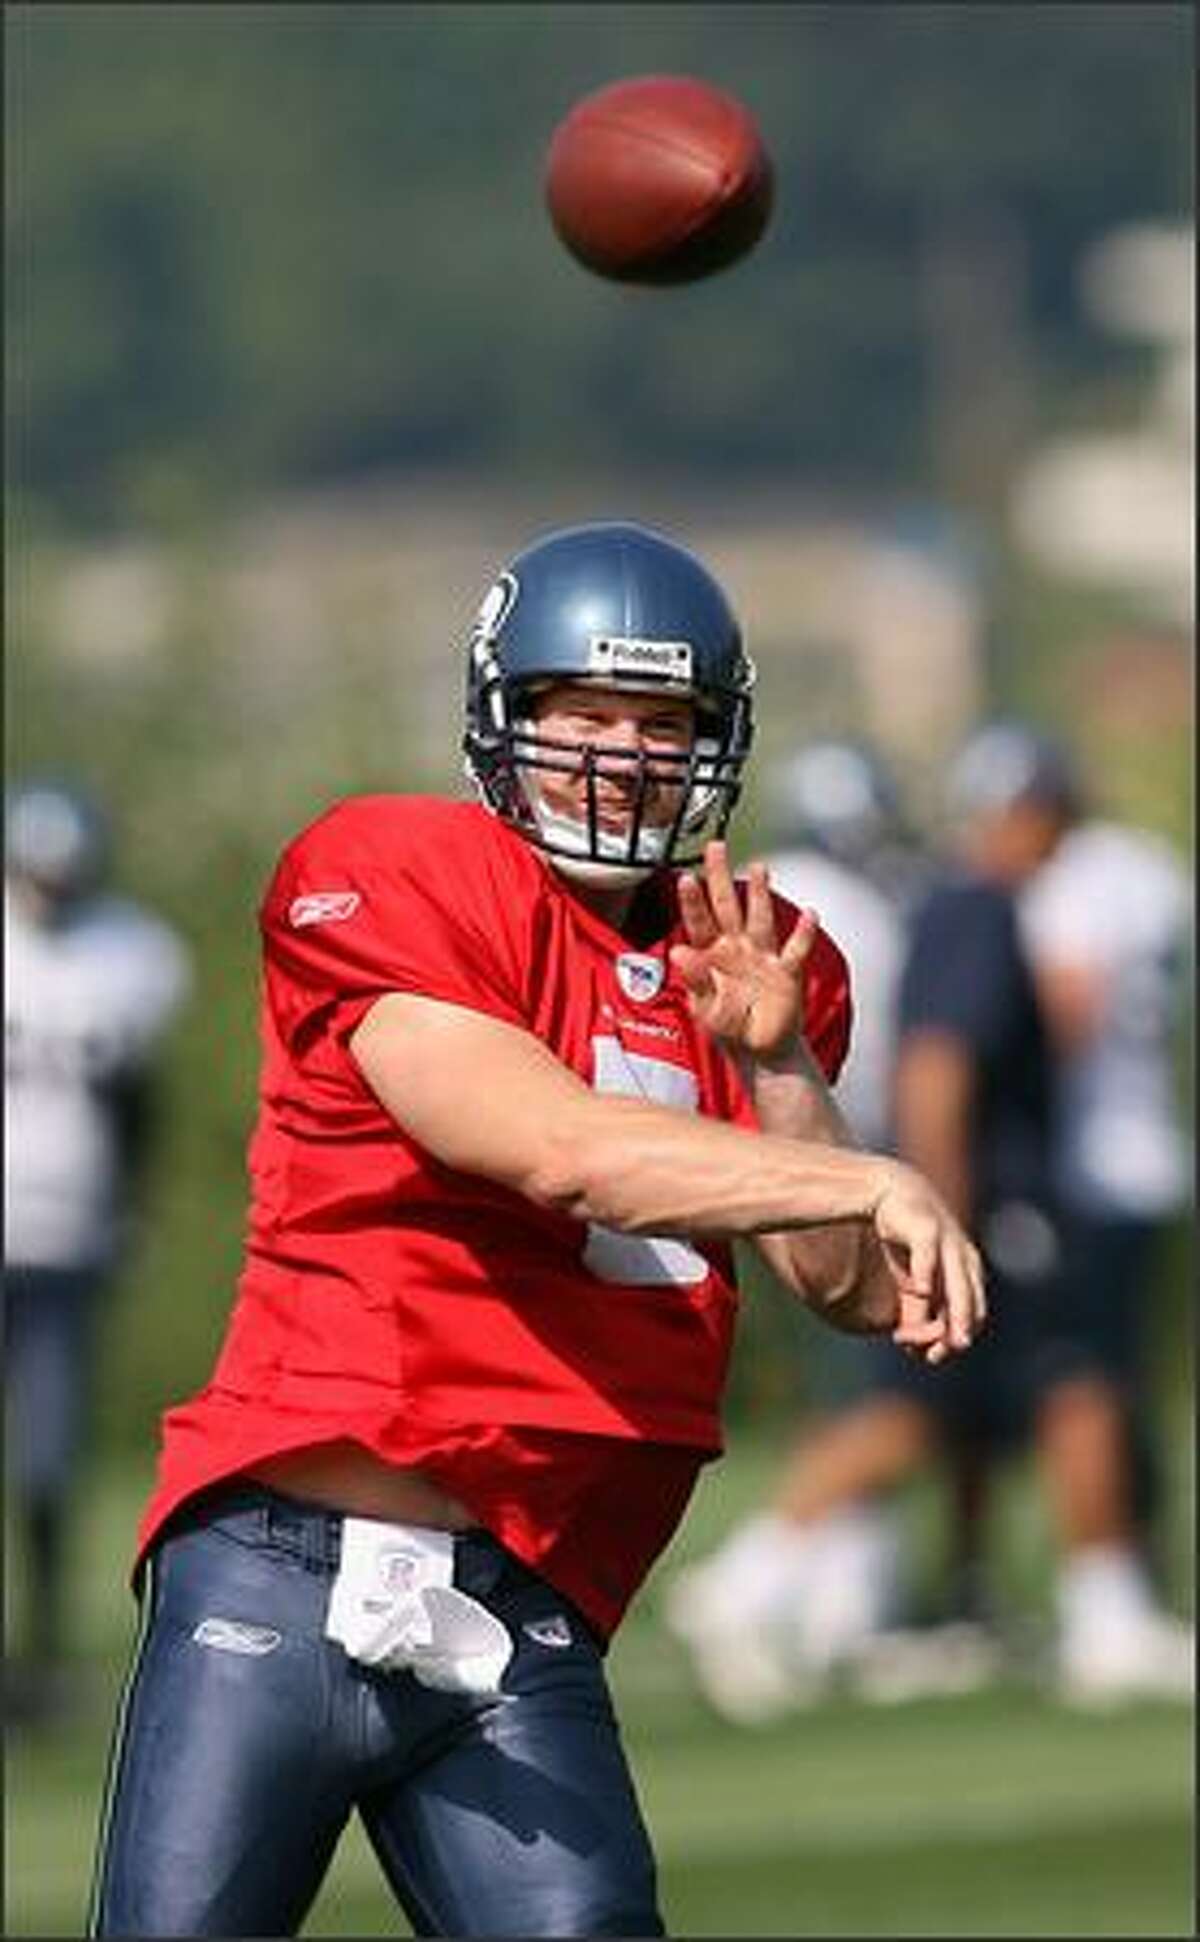 Backup quarterback Charlie Fry fires a pass as the Seahawks hold their first practice at their new practice facility.